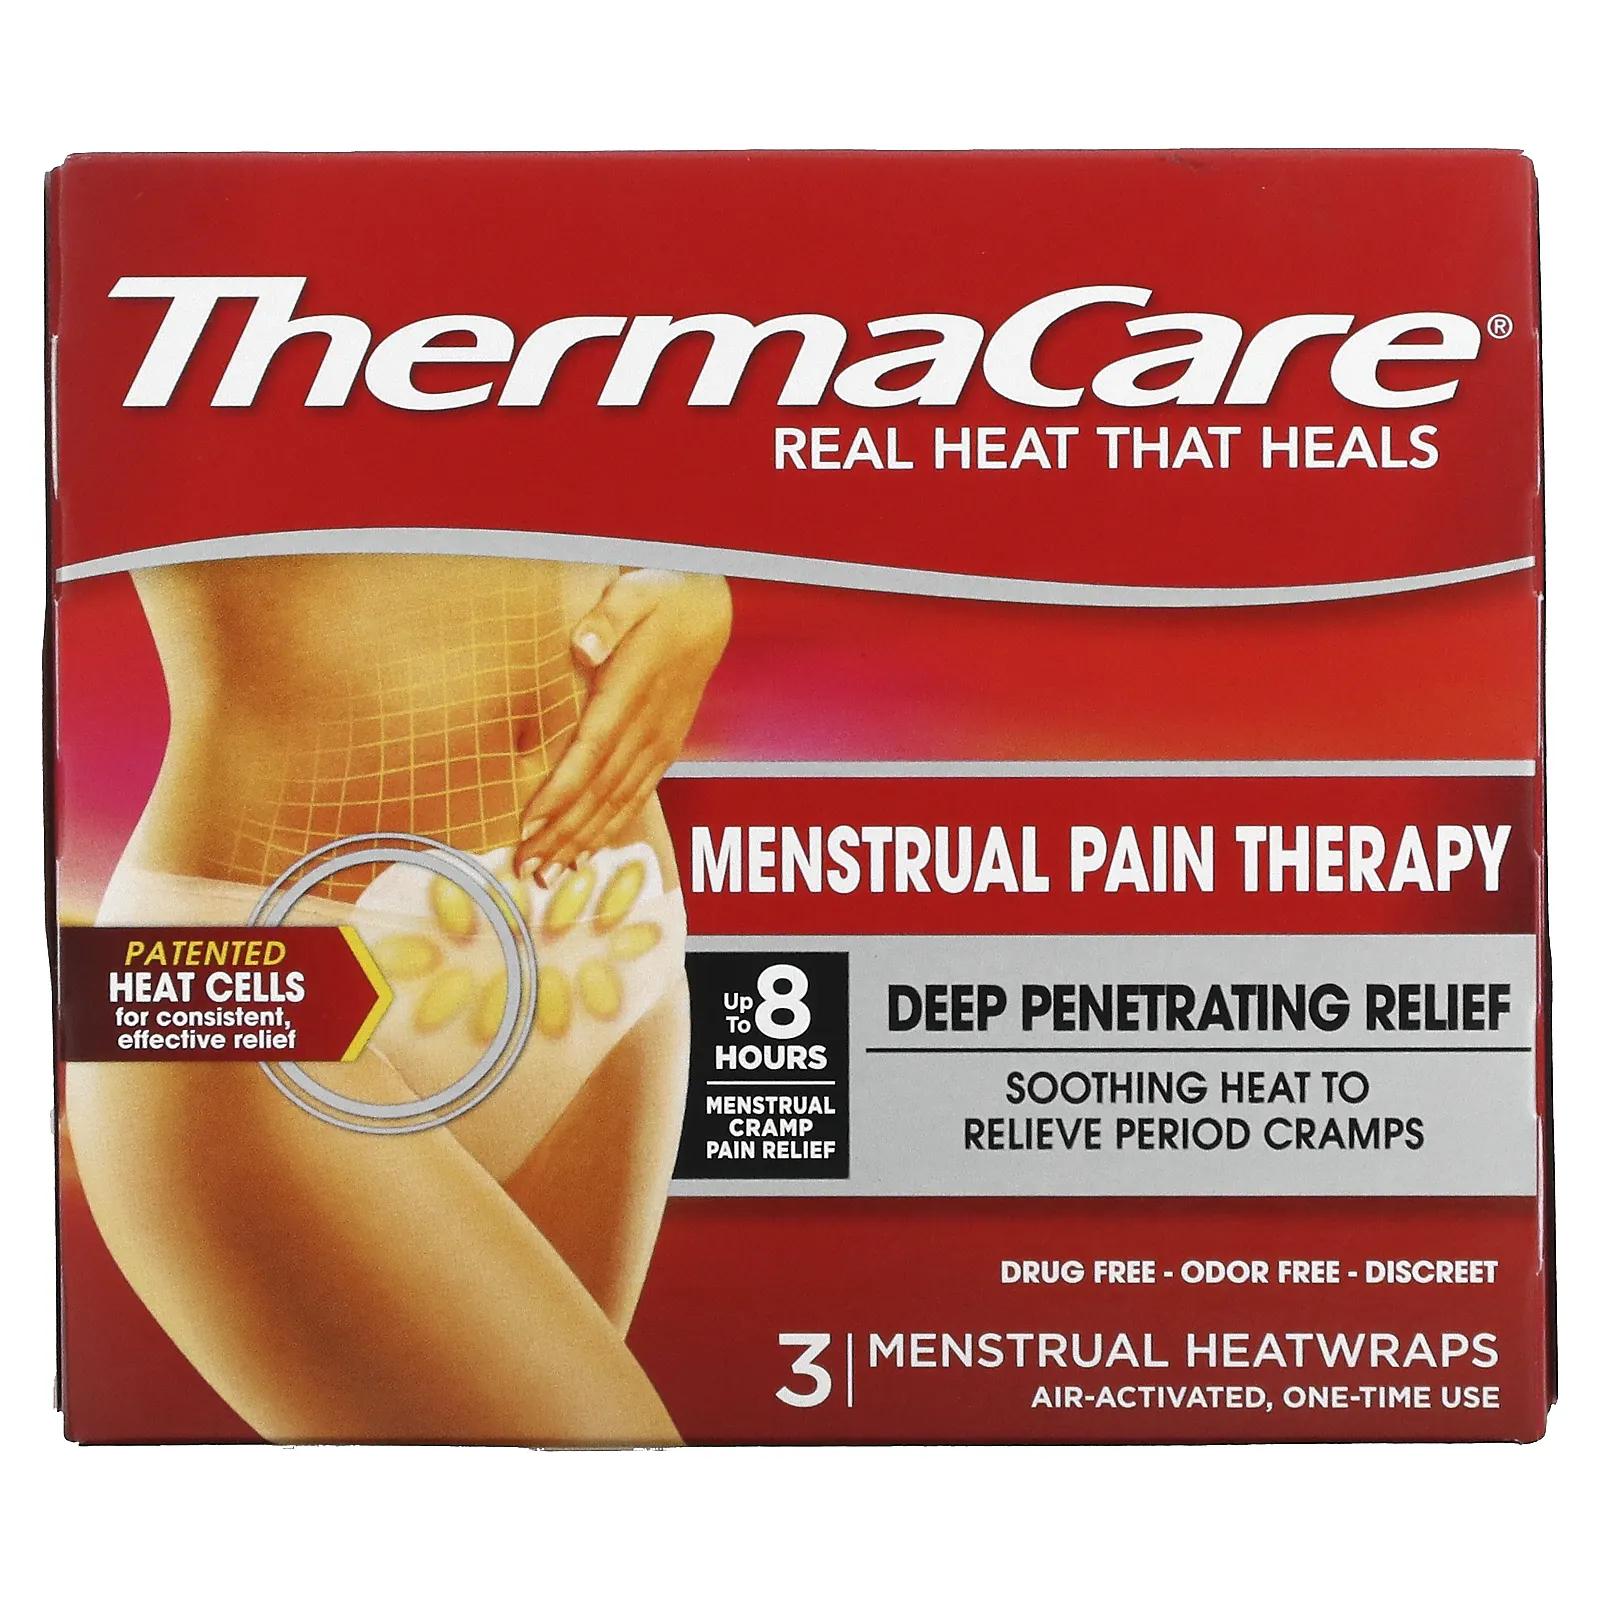 thermacare advanced neck pain therapy 3 neck wrist ThermaCare Mentrual Pain Therapy 3 менструальных обертывания